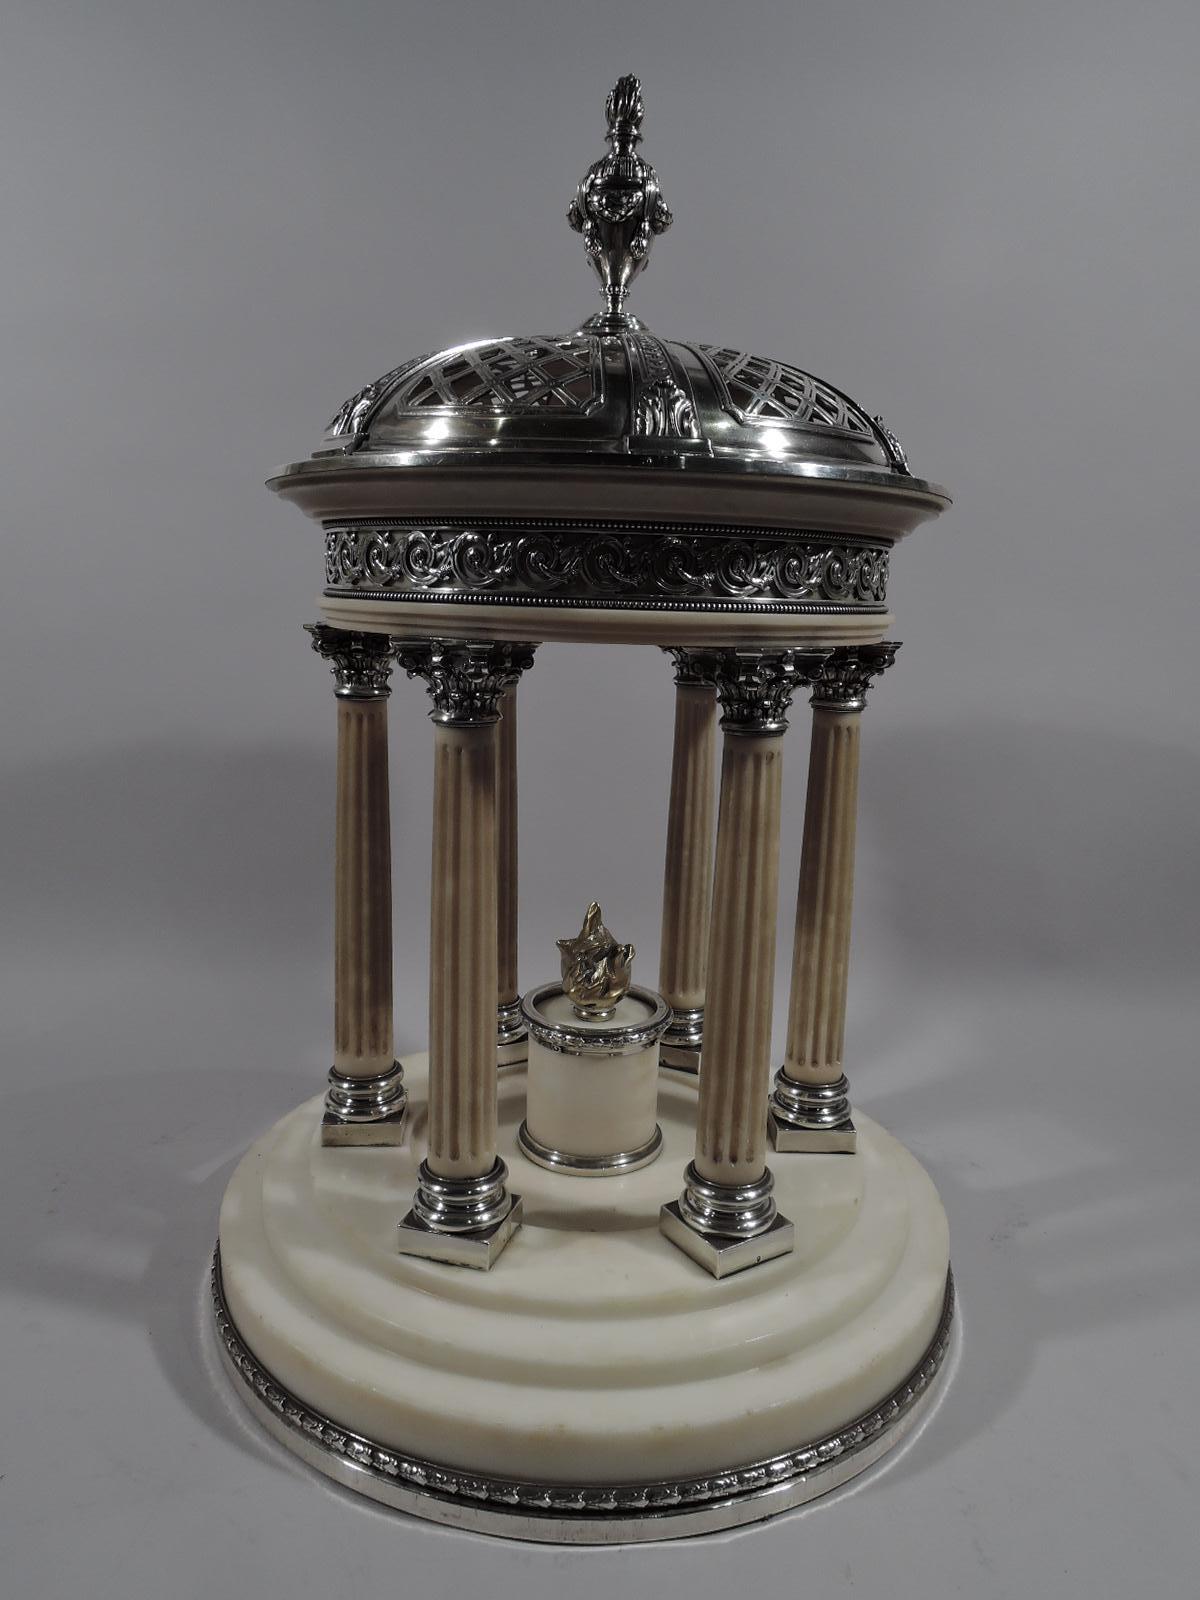 Neoclassical Revival Marie Antoinette’s Temple d’Amour Centerpiece with Mirrored Plateau